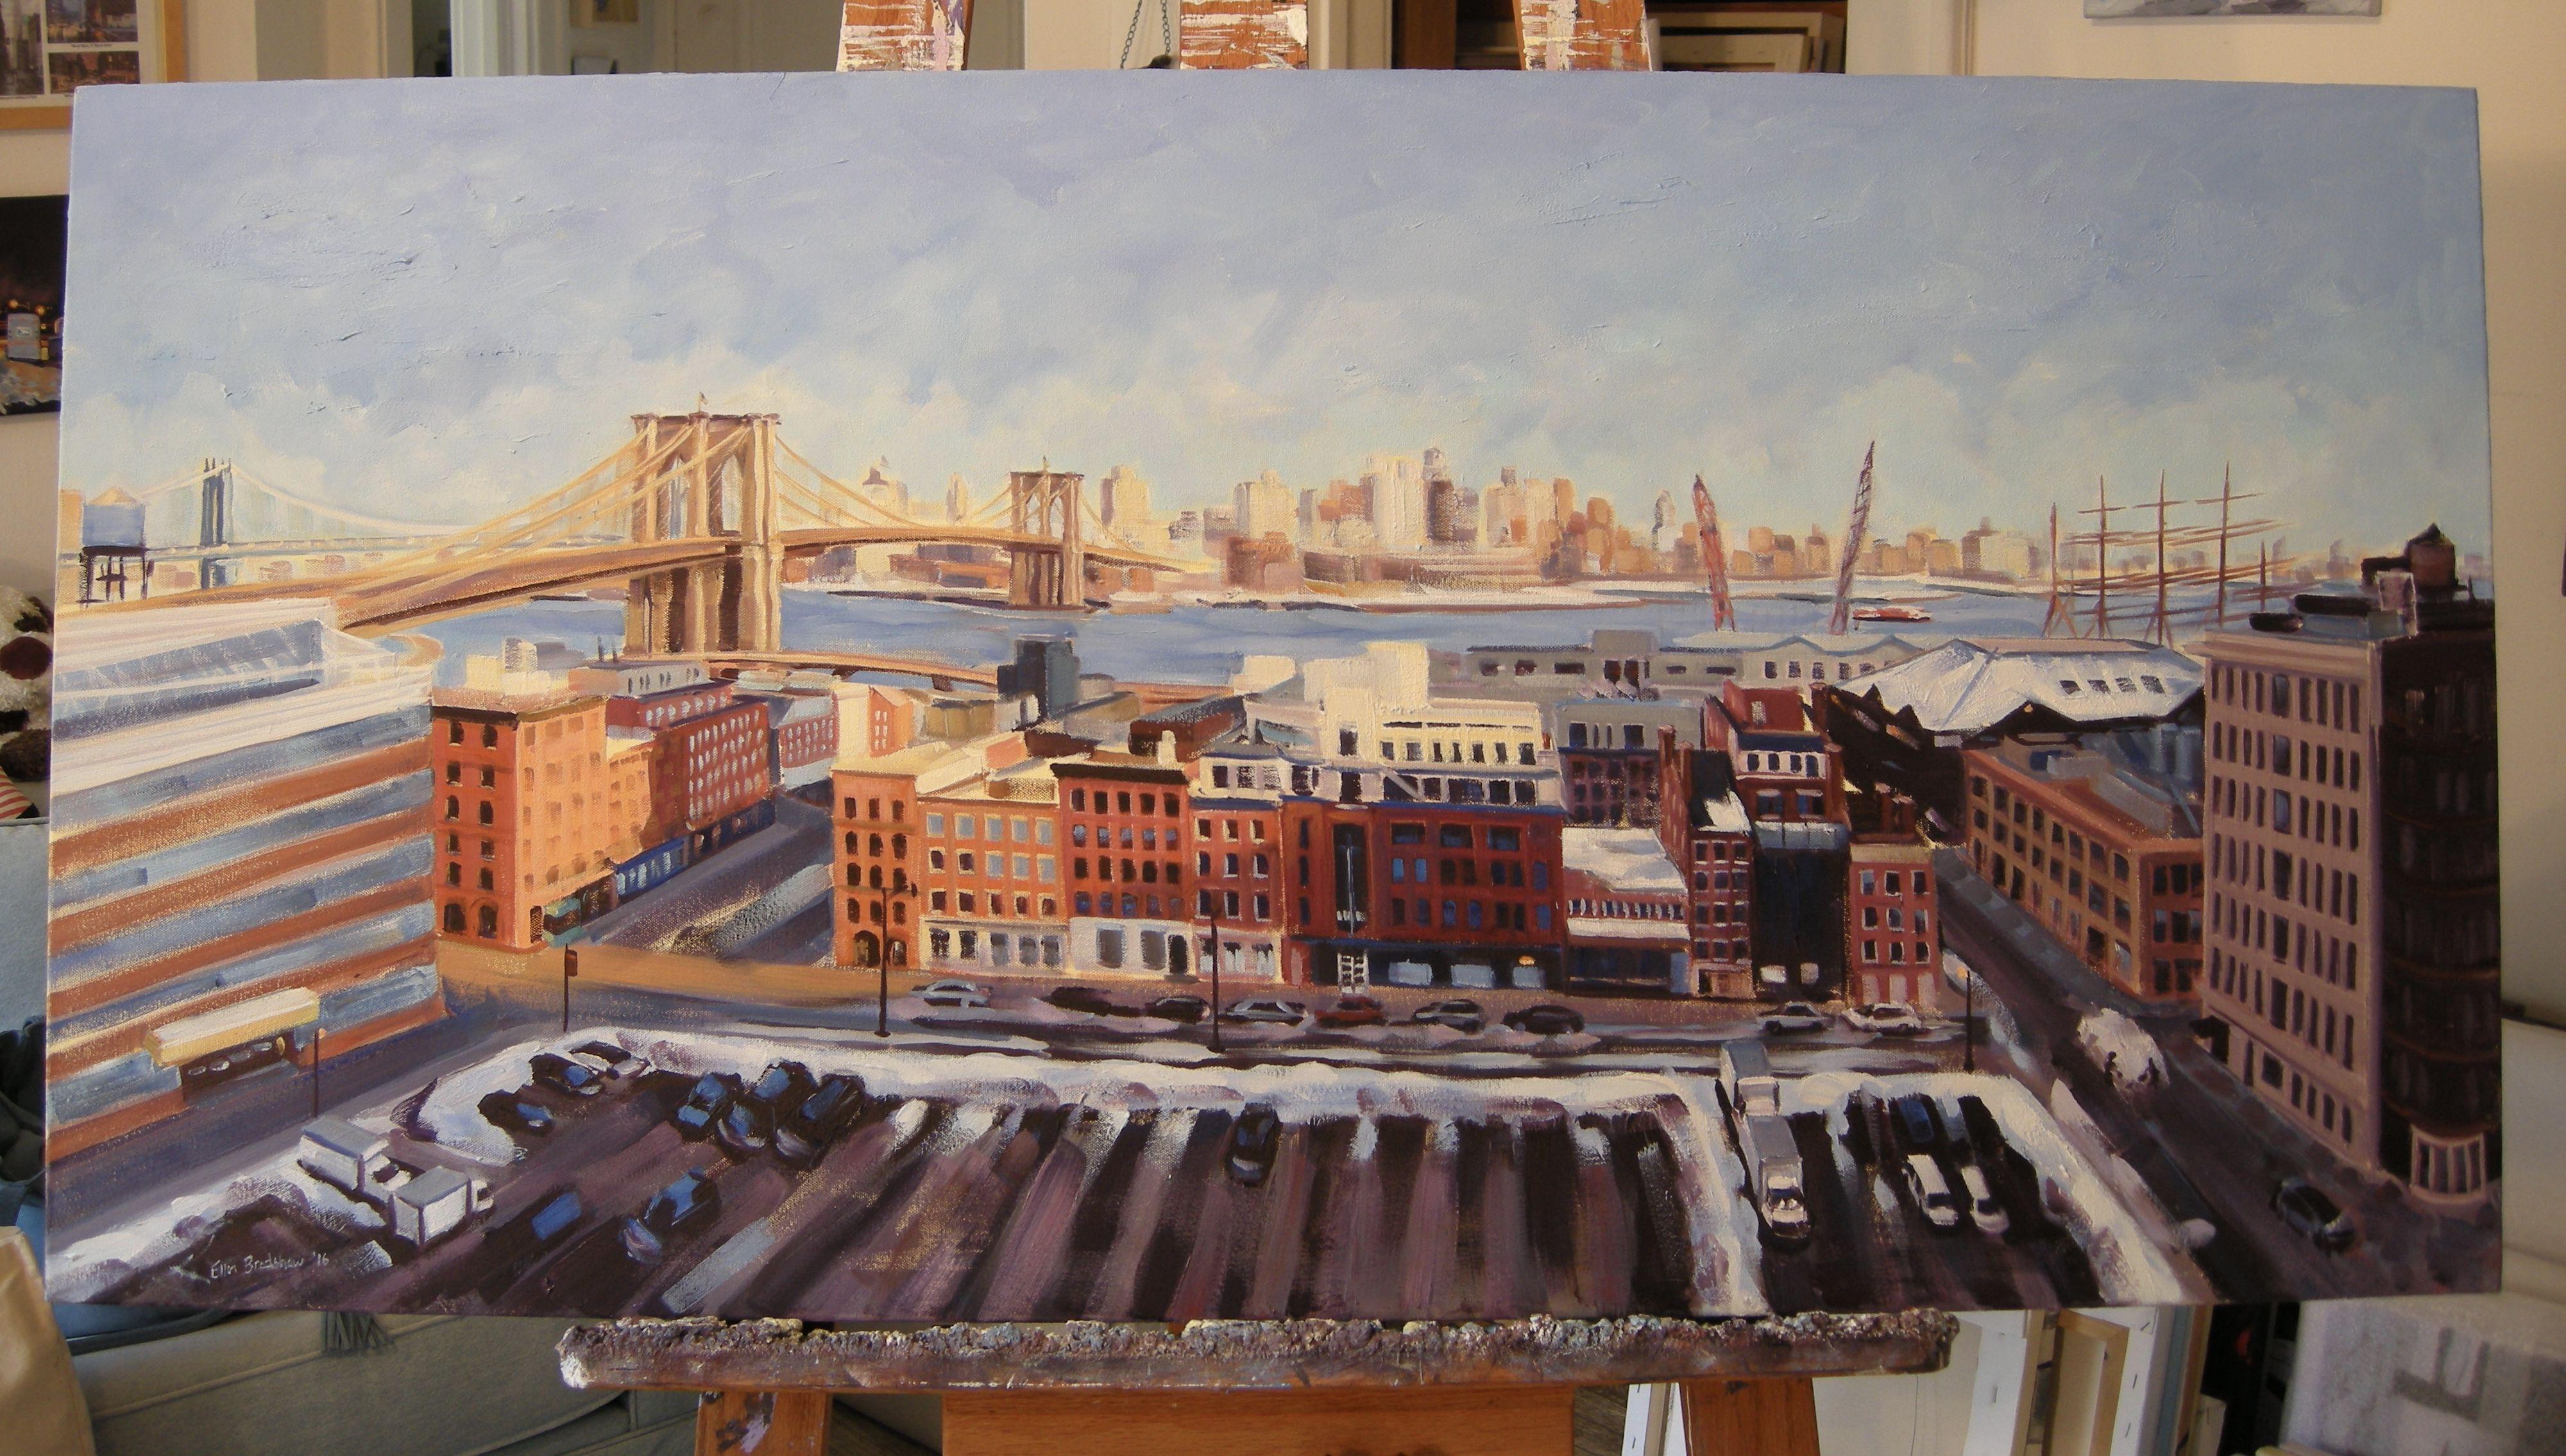 A sweeping view over the South Street Seaport in lower Manhattan from the balcony, encompassing the Brooklyn and Manhattan Bridges and beyond to Brooklyn. :: Painting :: Realism :: This piece comes with an official certificate of authenticity signed